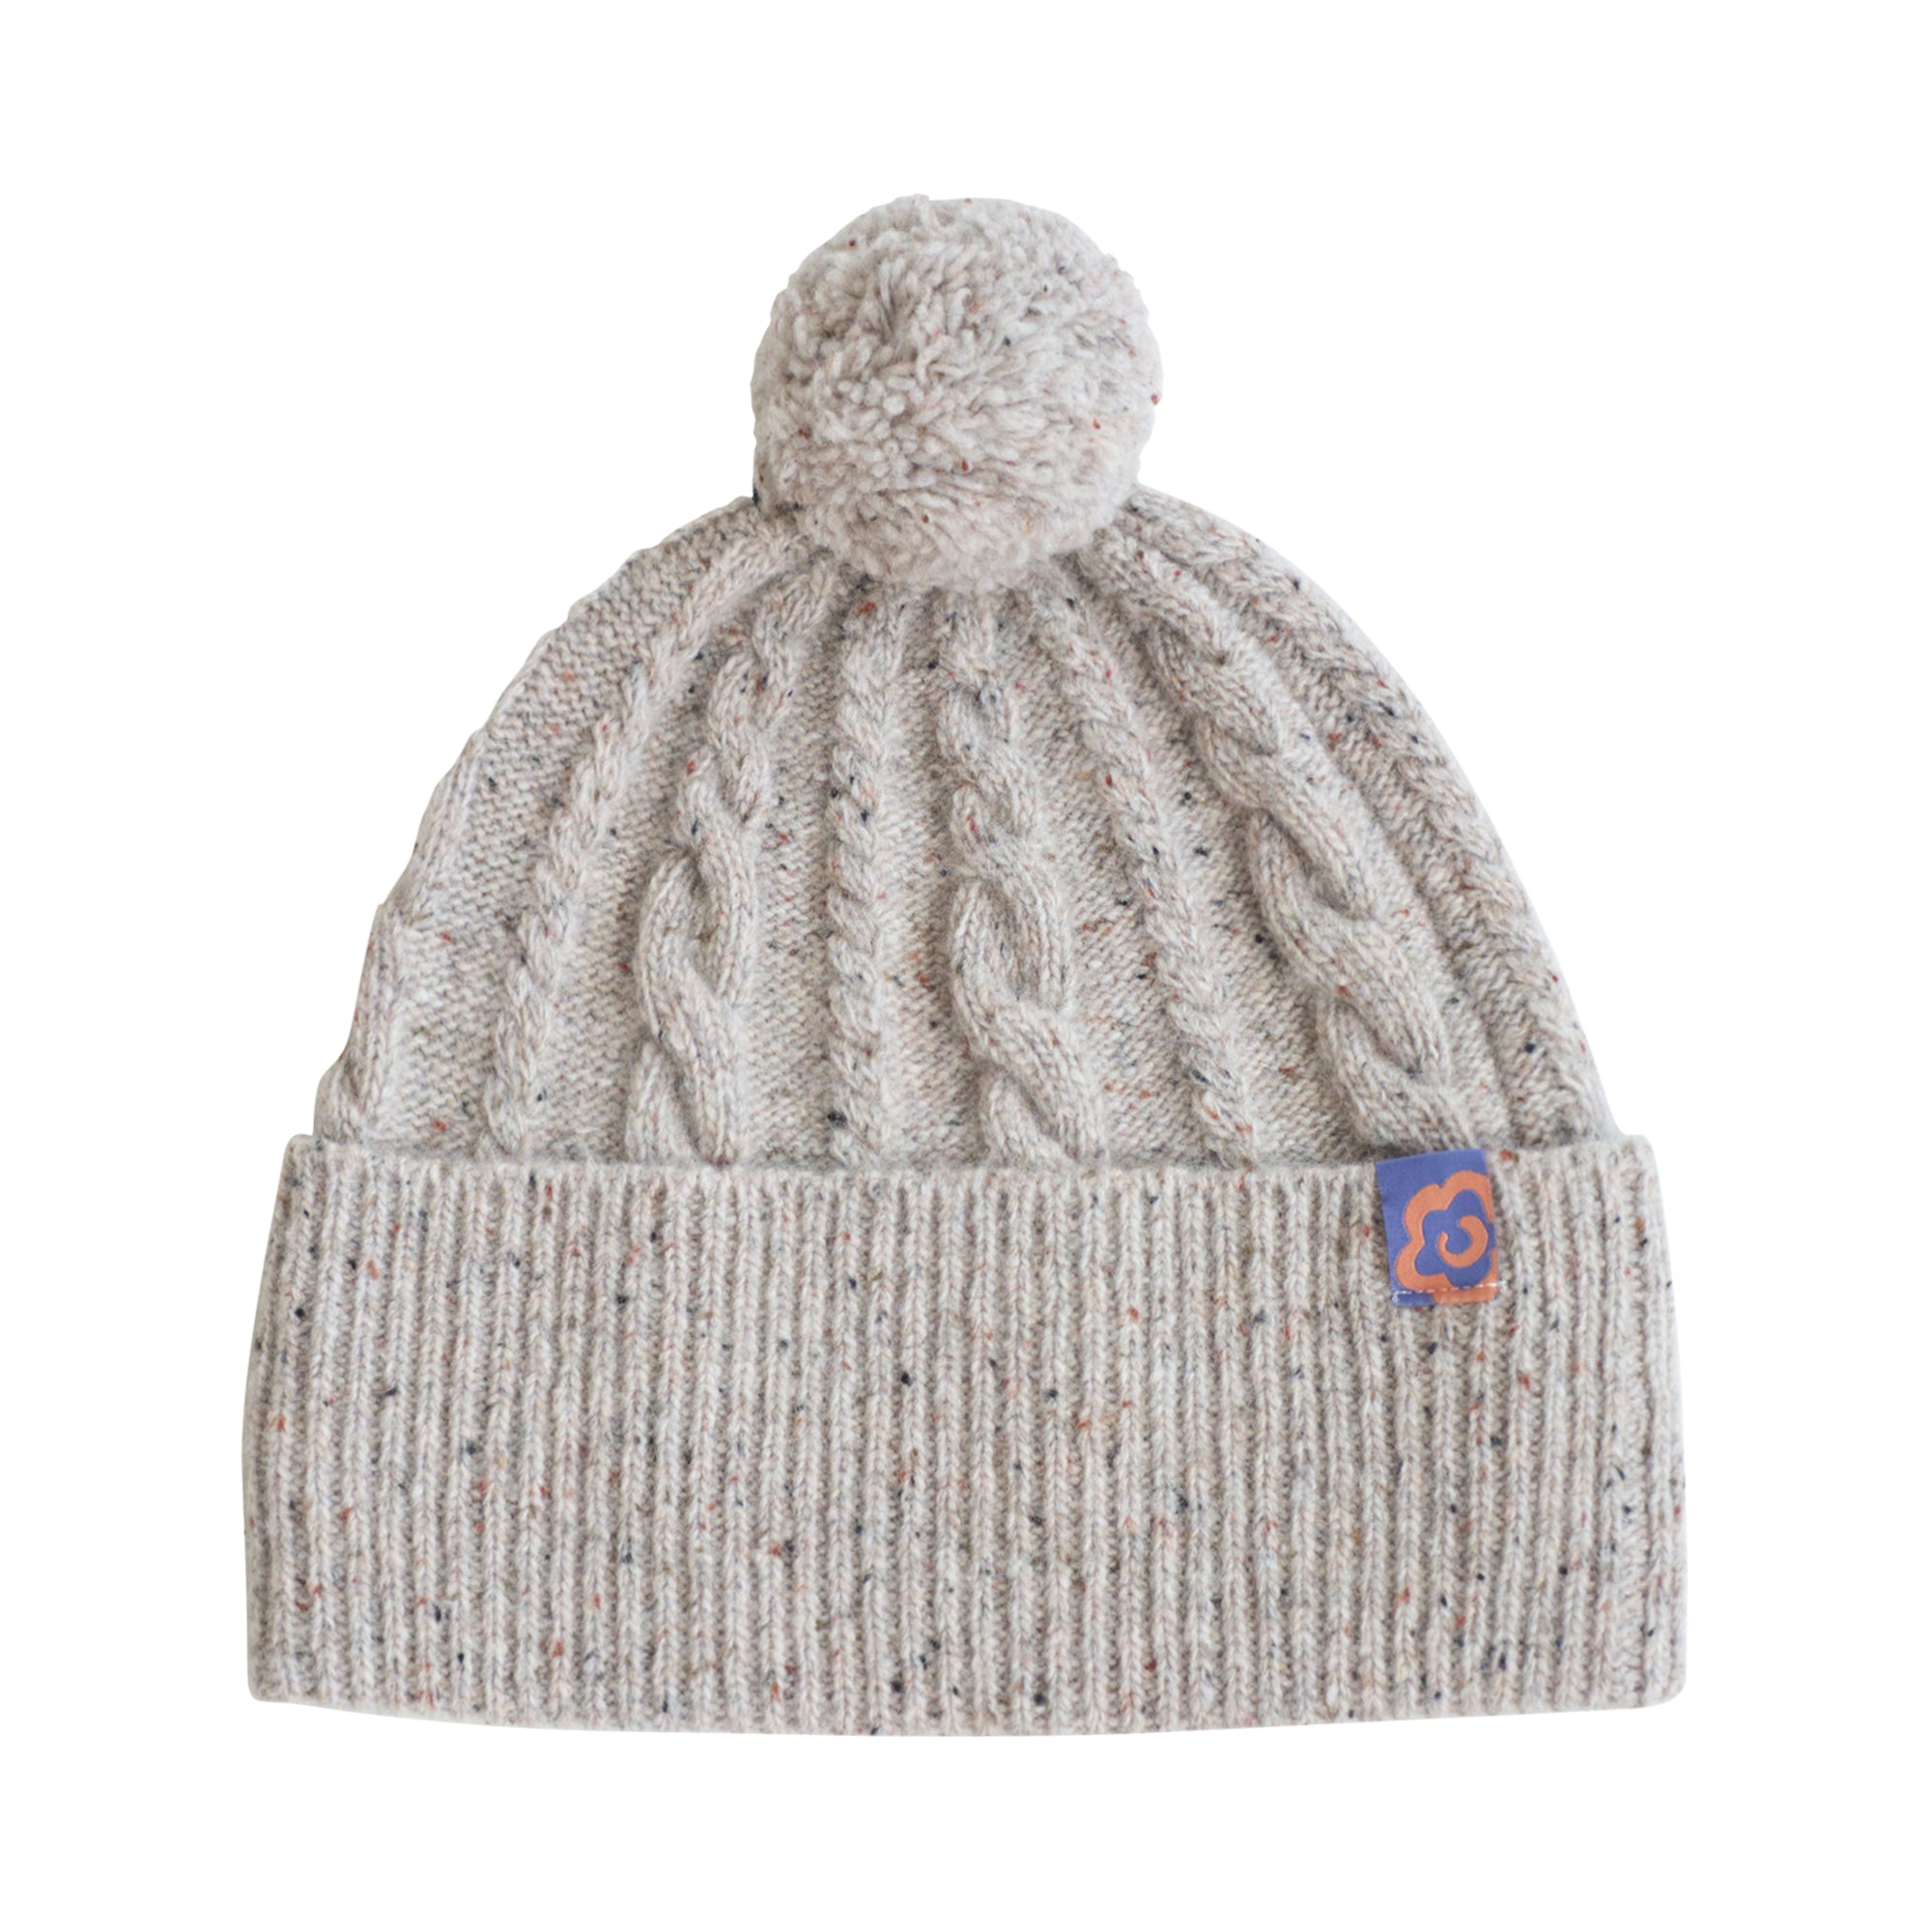 "Pom Pom" Cable Knit Wool Beanie - Silver Grey - Silver Grey - LOST PATTERN Cashmere